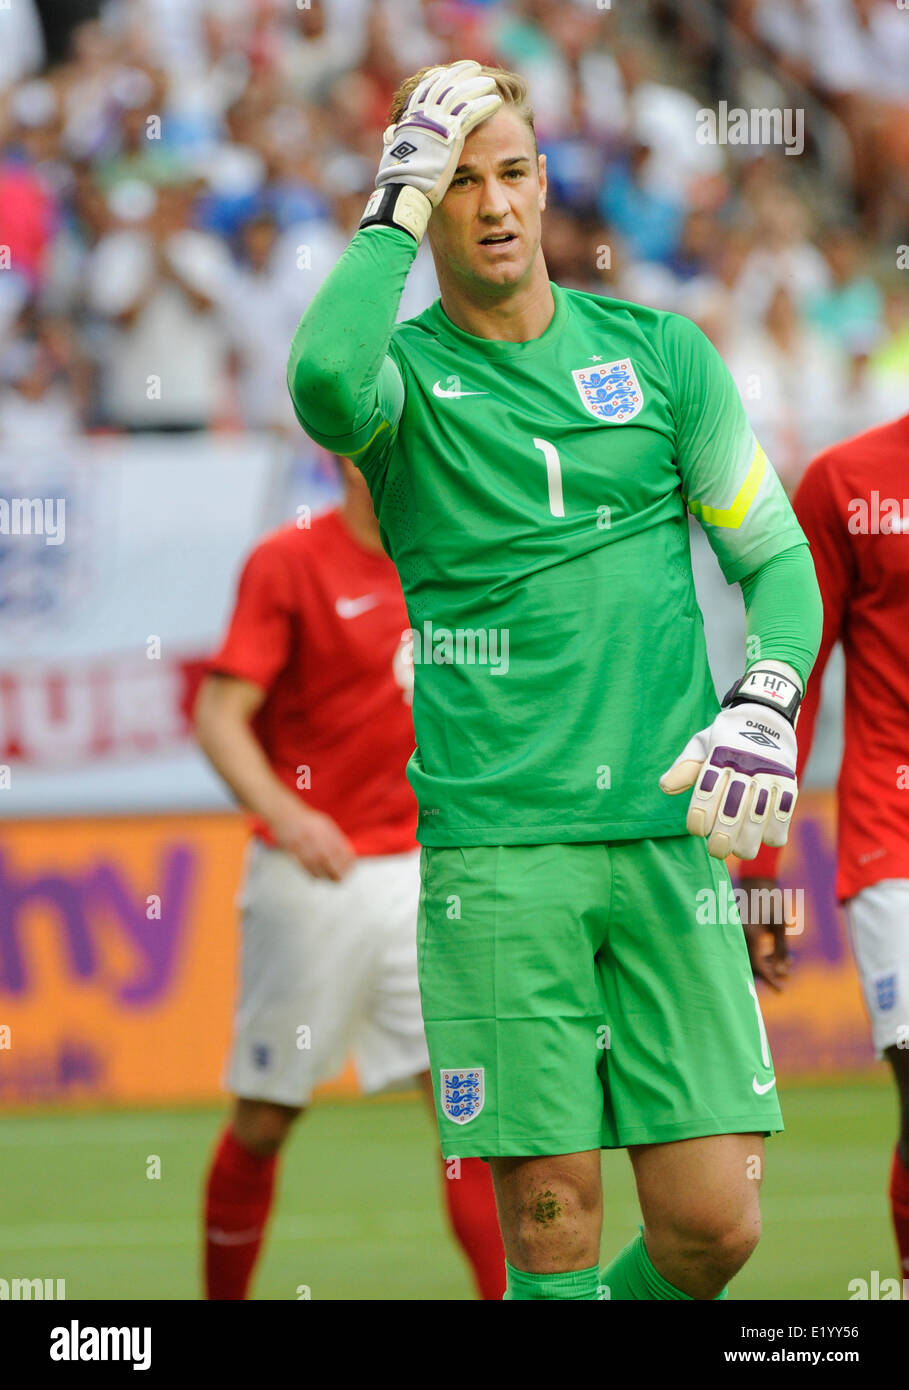 Florida, USA. 7th June, 2014. England Goalkeeper Joe Hart (1) holds his head during an international friendly world cup warm up soccer match between England and Honduras at the Sun Life Stadium in Miami Gardens, Florida. © Action Plus Sports/Alamy Live News Stock Photo